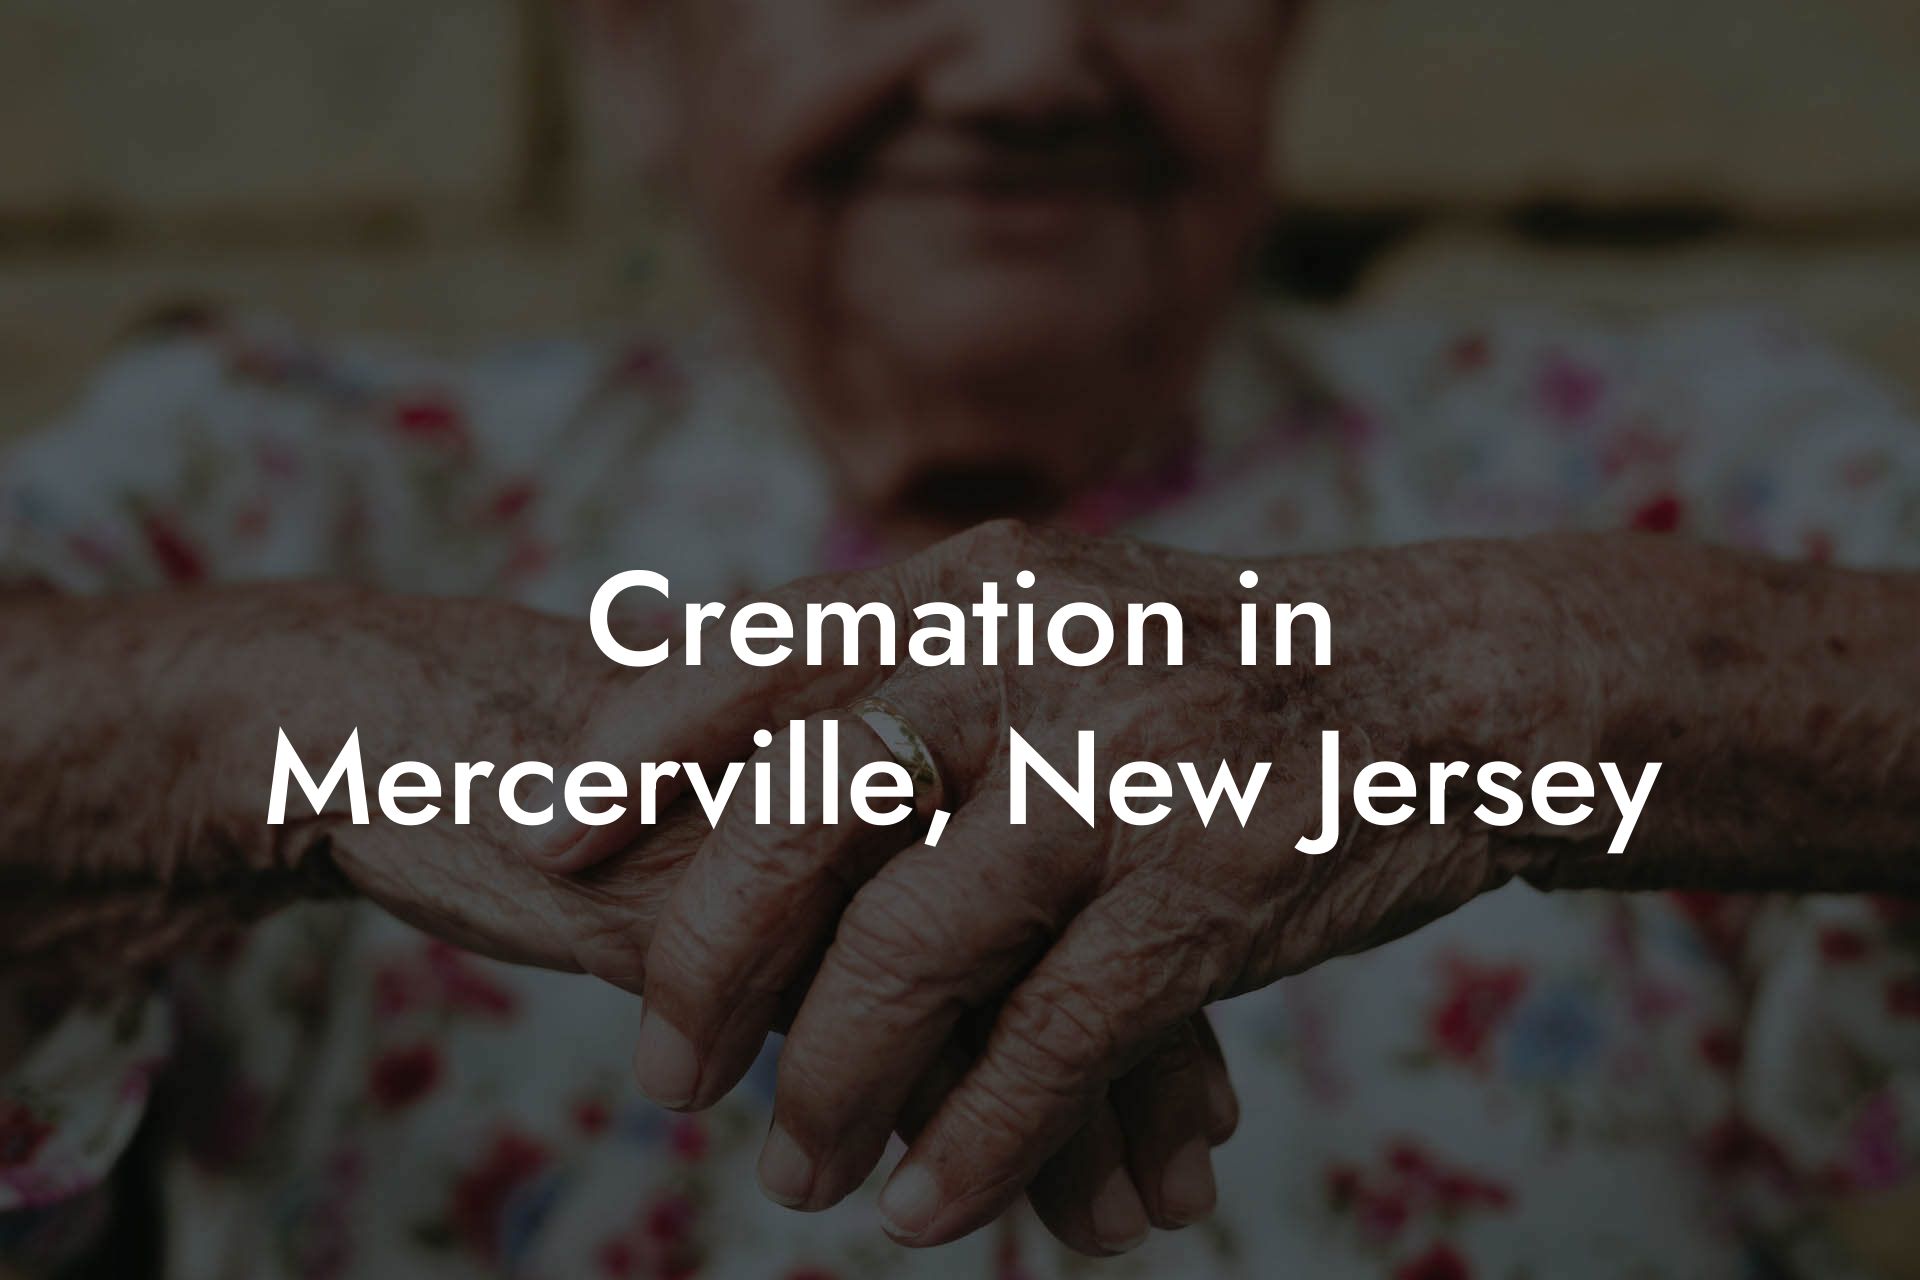 Cremation in Mercerville, New Jersey